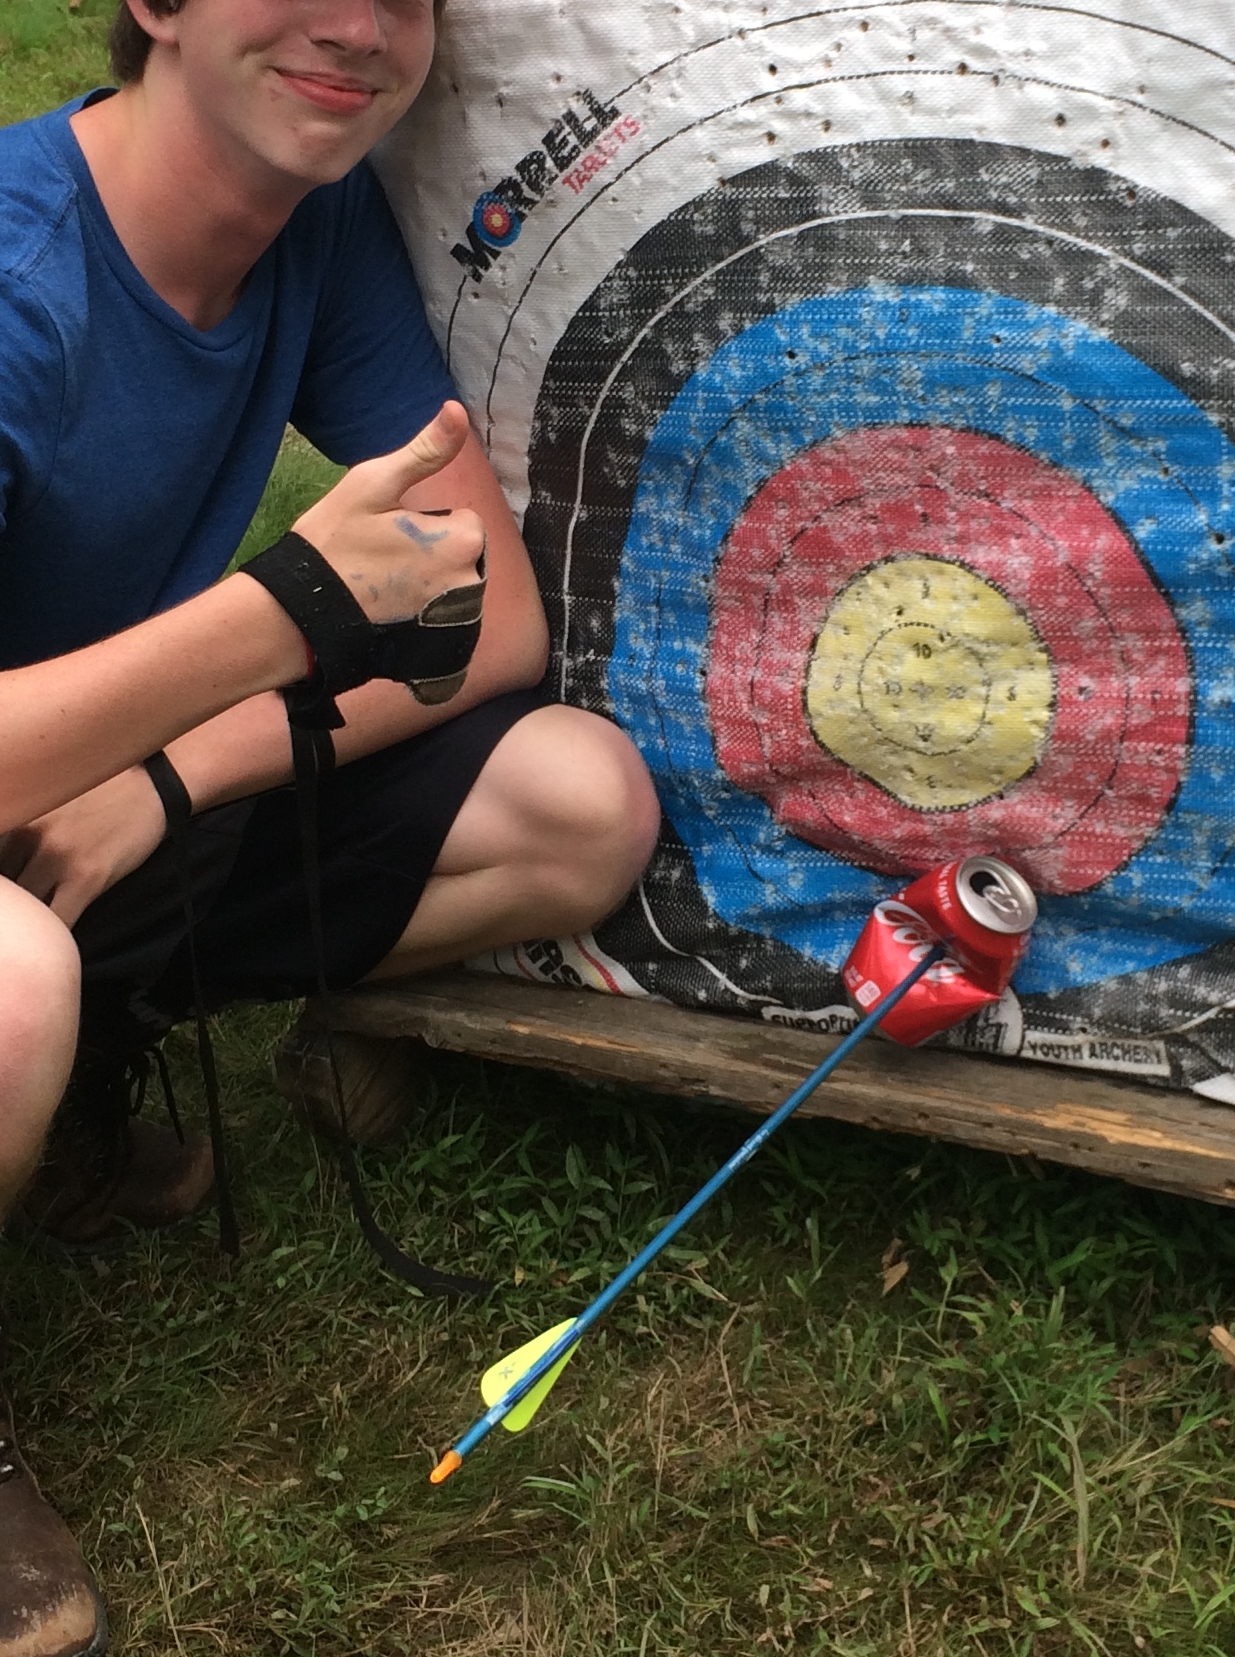 A 17-year-old giving a thumbs up next to a target, where an arrow has pierced his soda can.